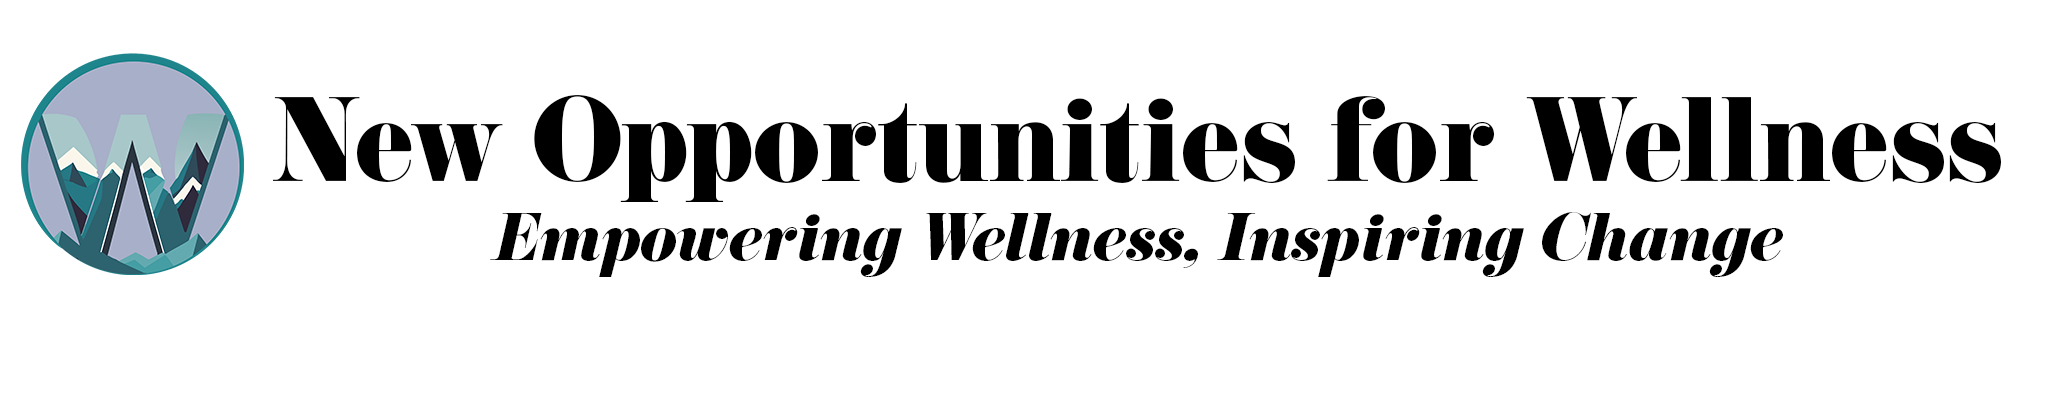 New opportunities for wellness